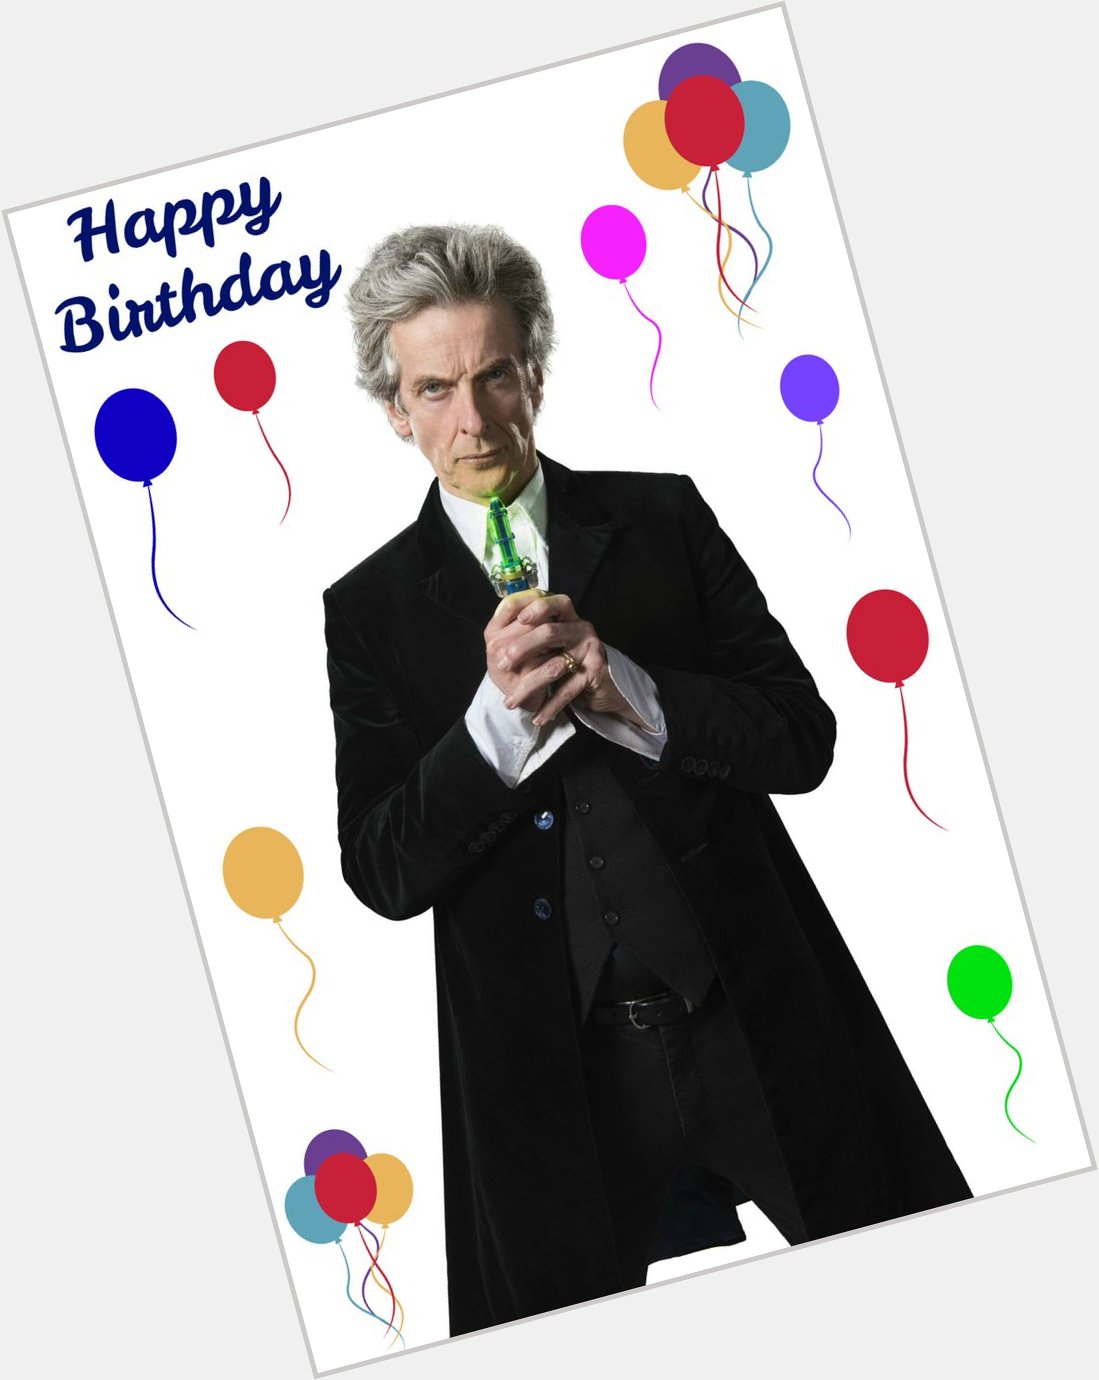                Happy 59th Birthday To Peter Capaldi, The Twelfth Doctor               